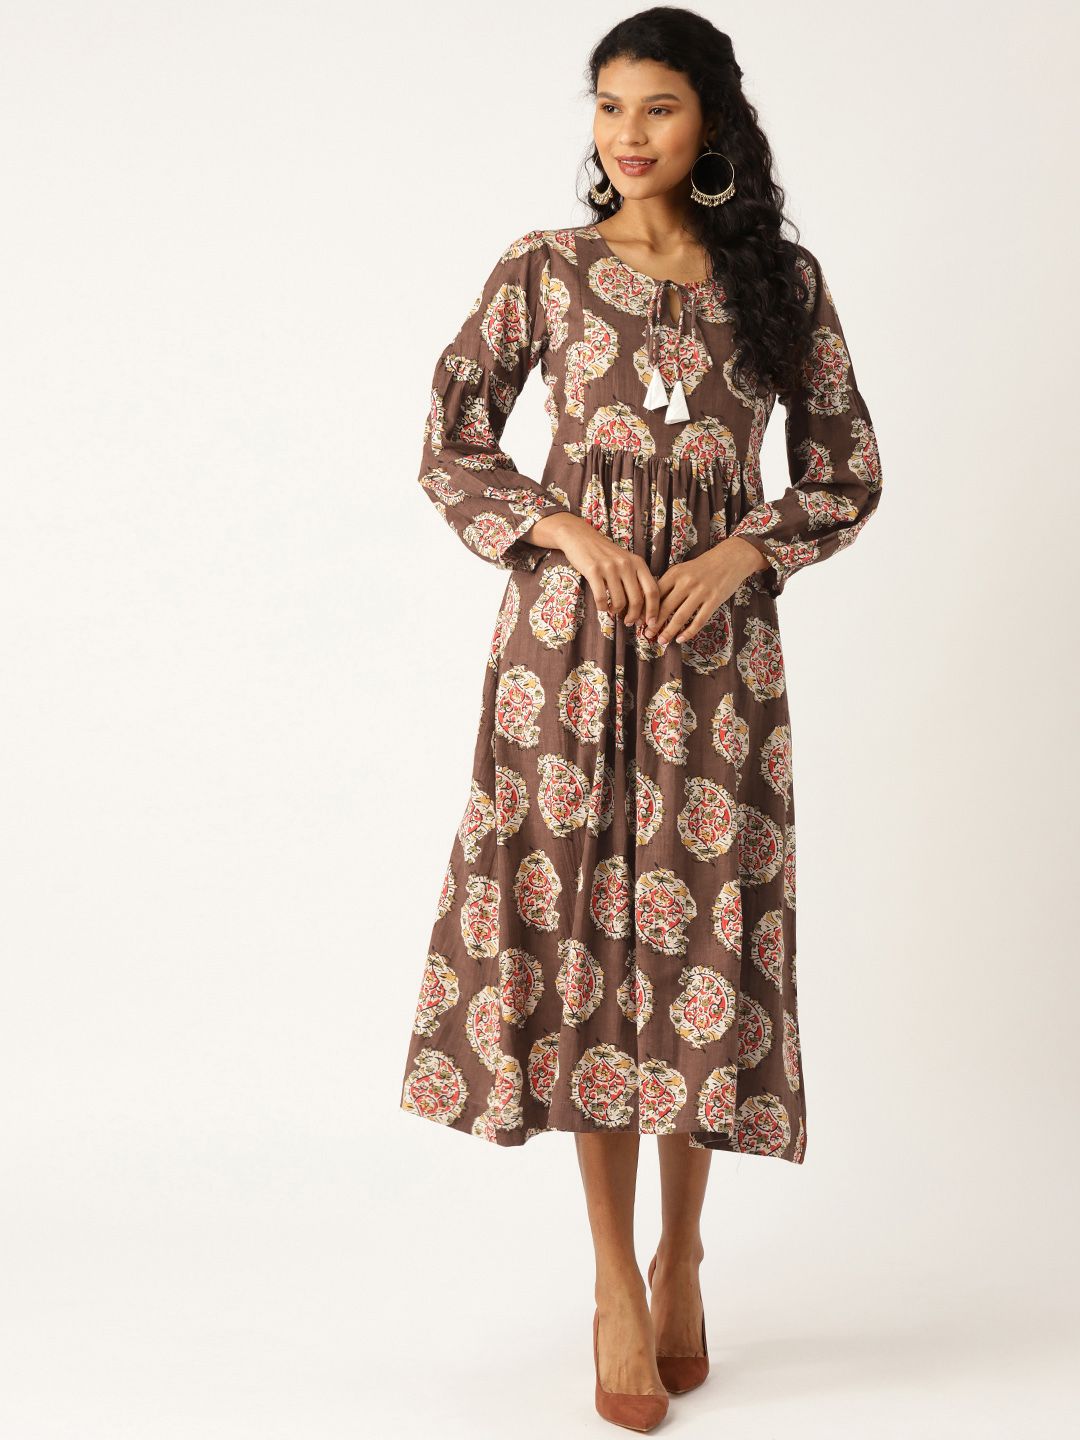 Shae by SASSAFRAS Women Brown & Off-White Printed A-Line Dress Price in India